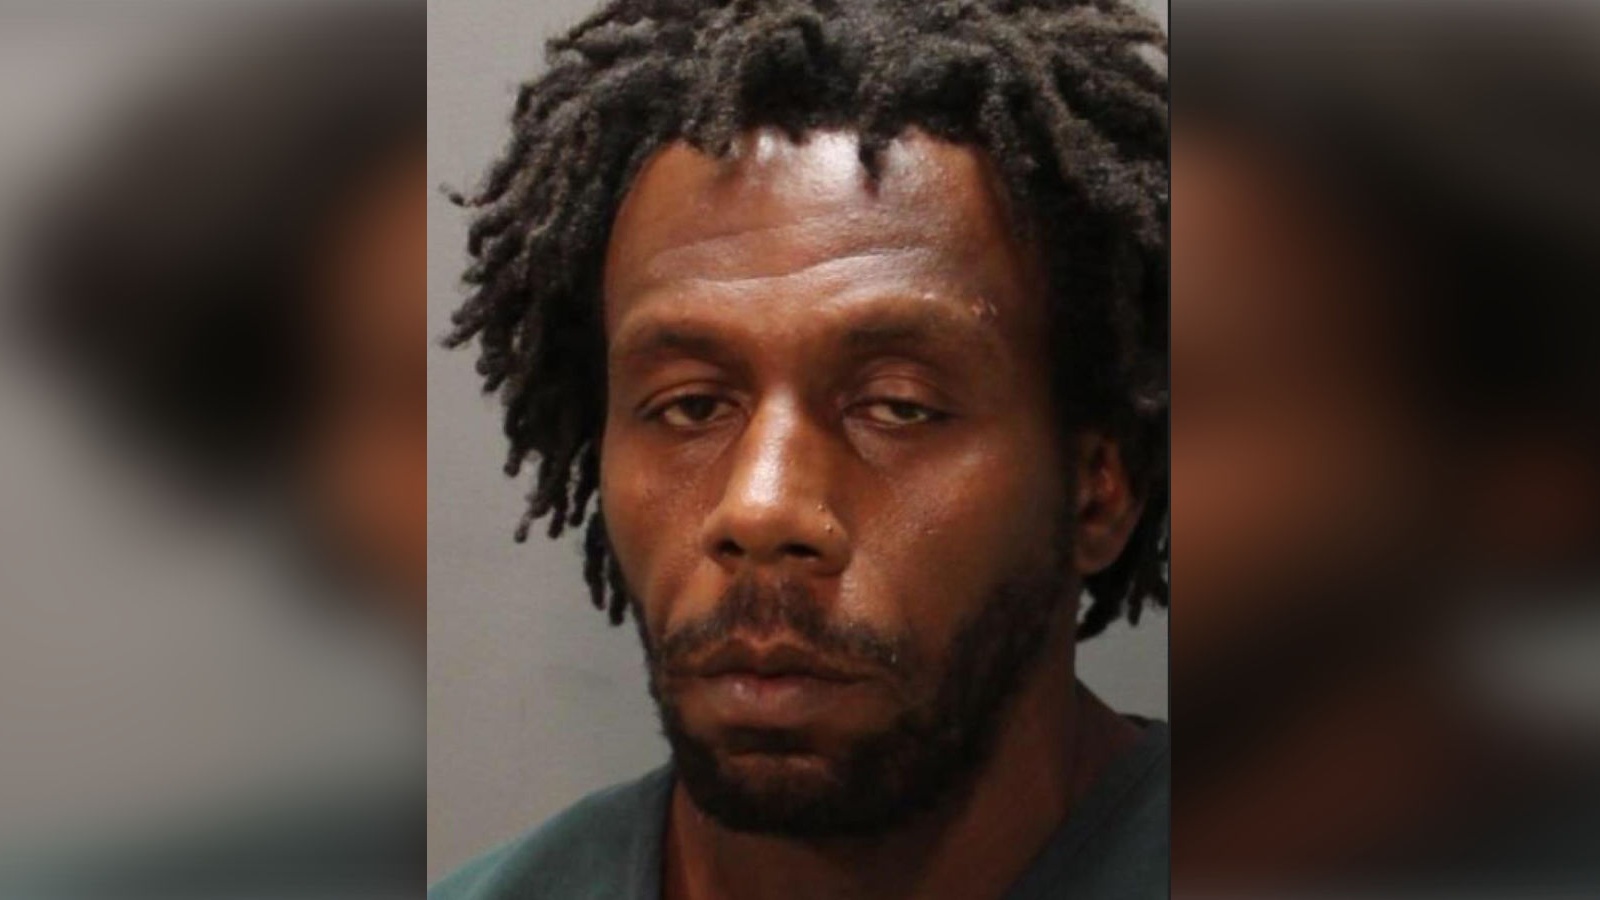 Florida Man Arrested After Beating Trans Woman Then Dragging Her Behind His Van